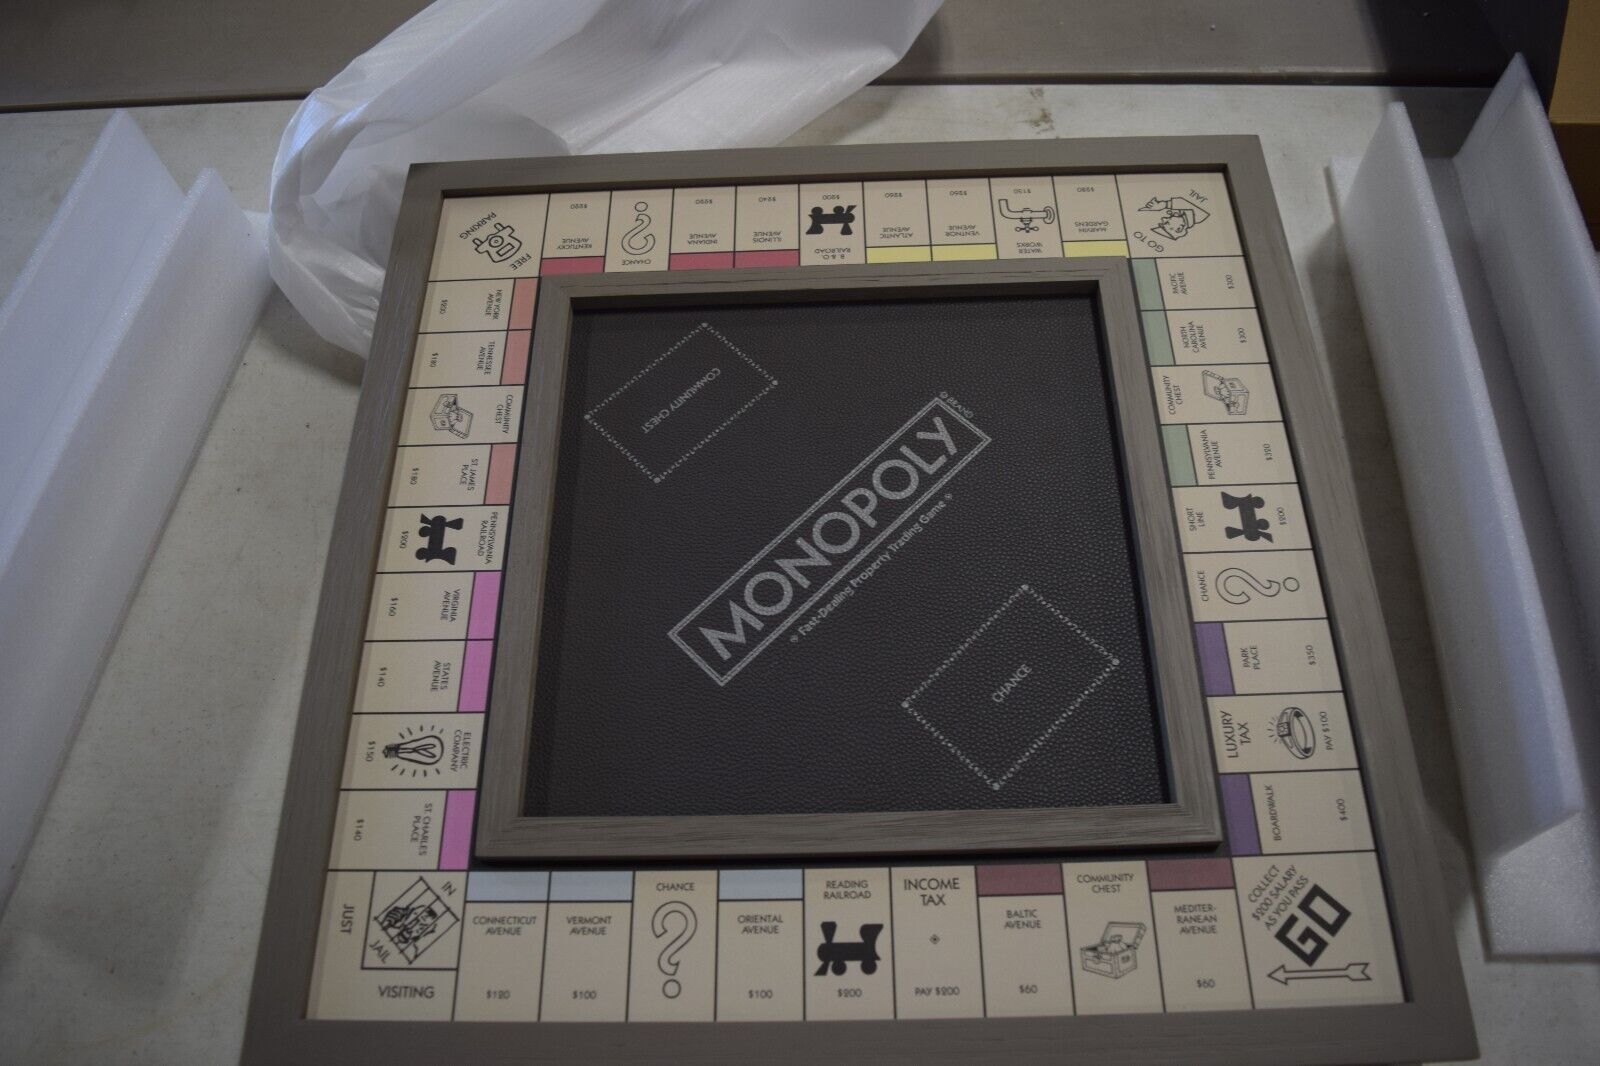 Pottery Barn Wooden Monopoly Board Game - Deluxe Edition | eBay